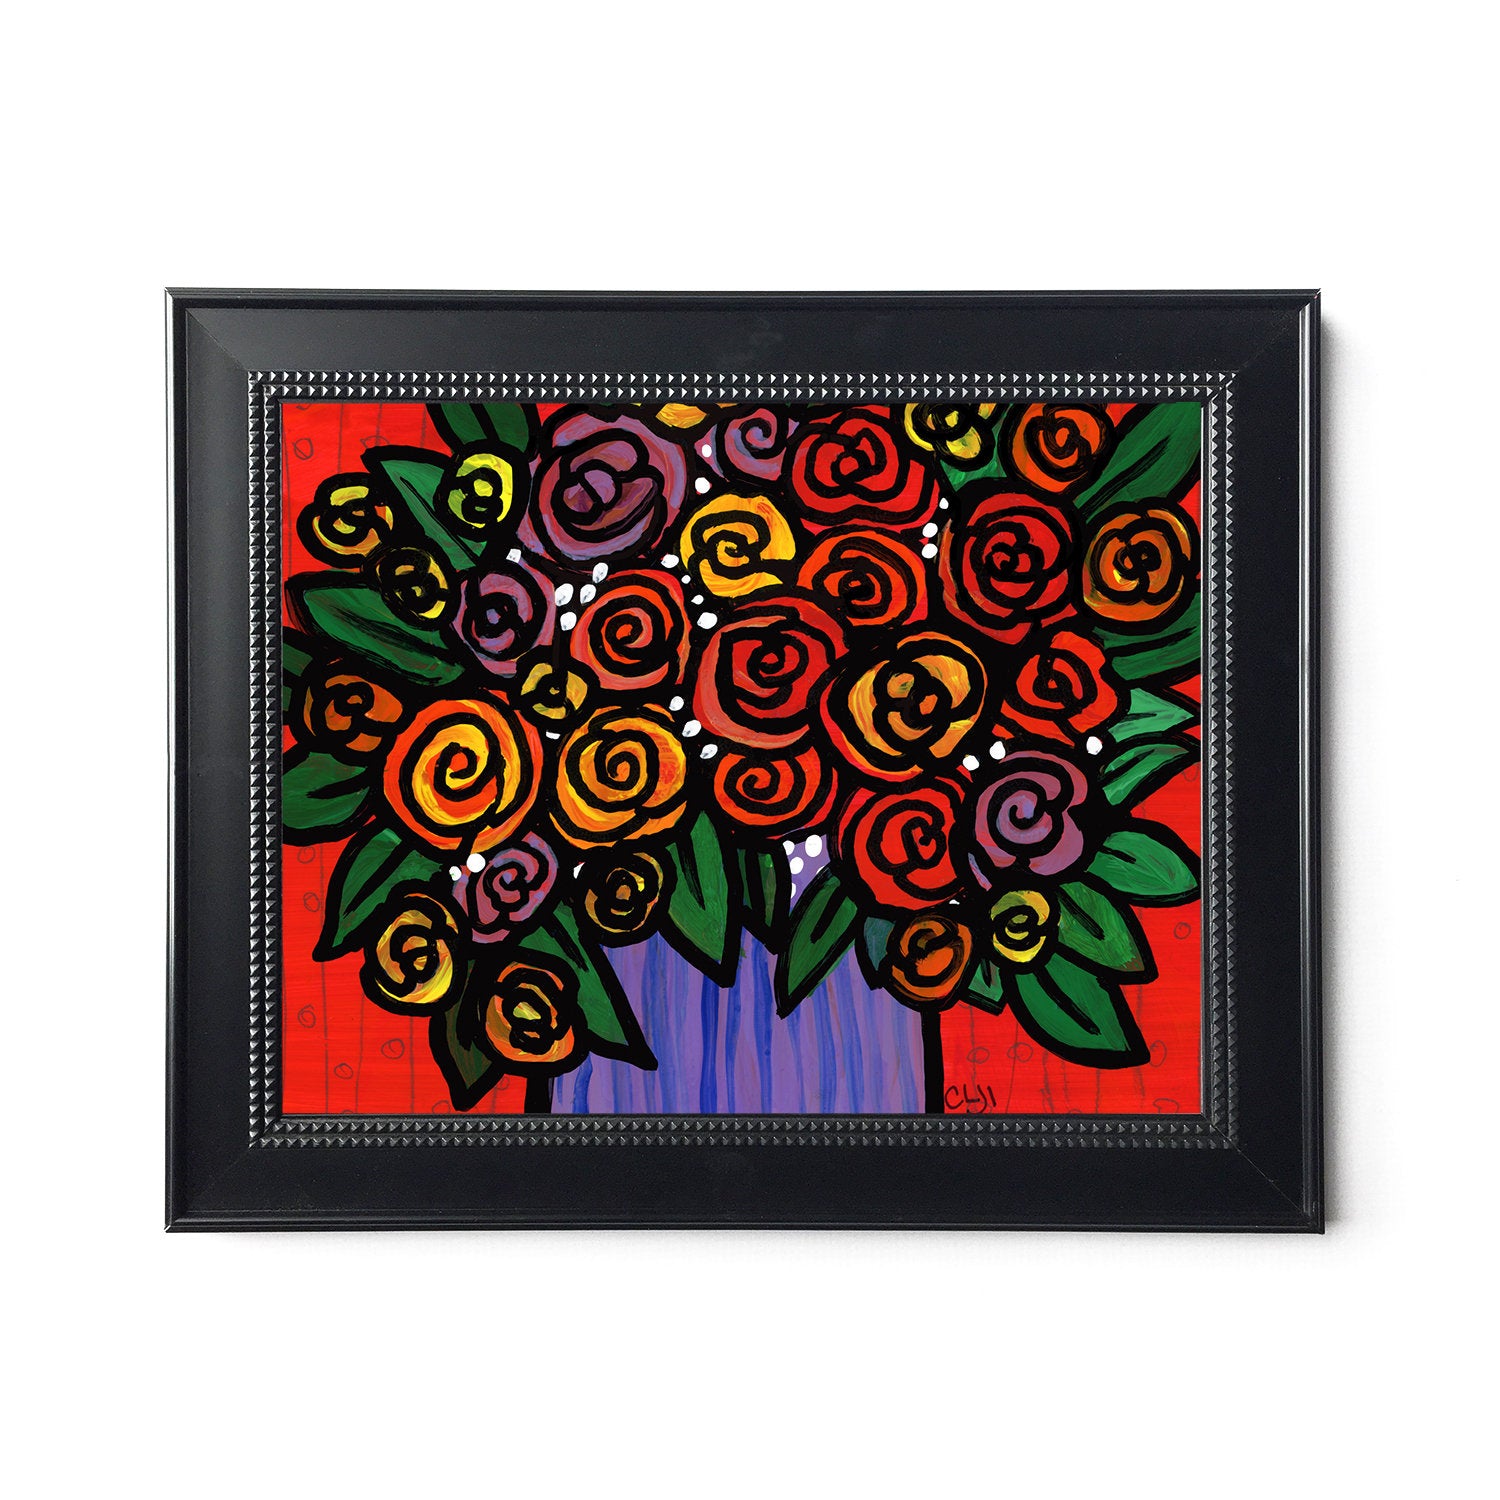 All the Roses Print - Colorful Floral Art Giclee for Bedroom, Bathroom, Living Room 